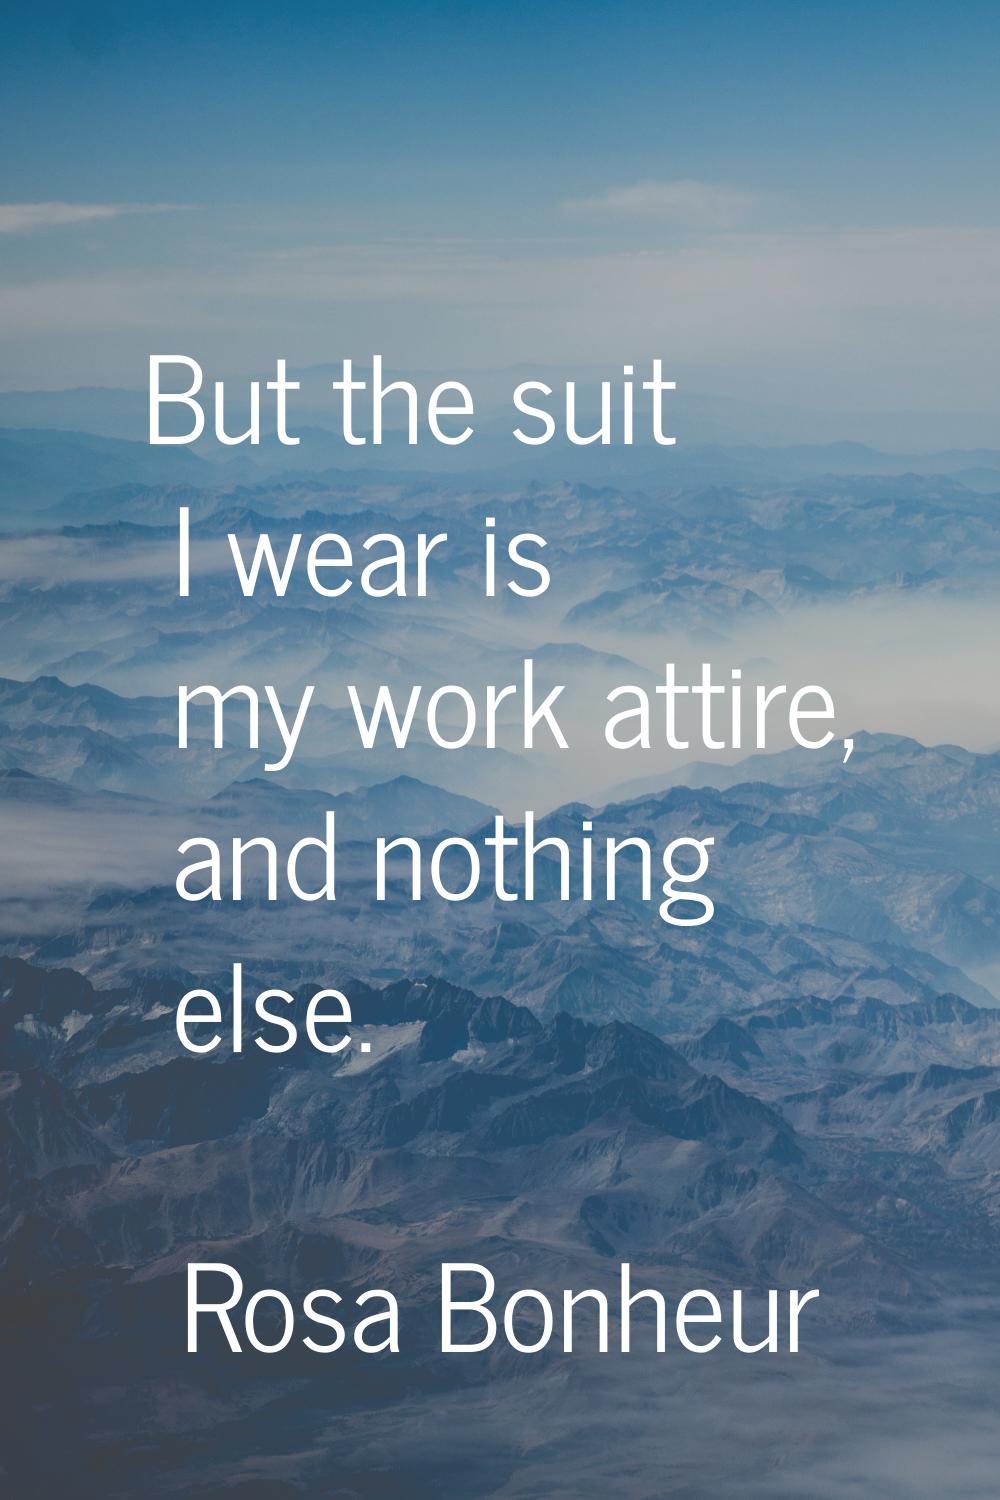 But the suit I wear is my work attire, and nothing else.